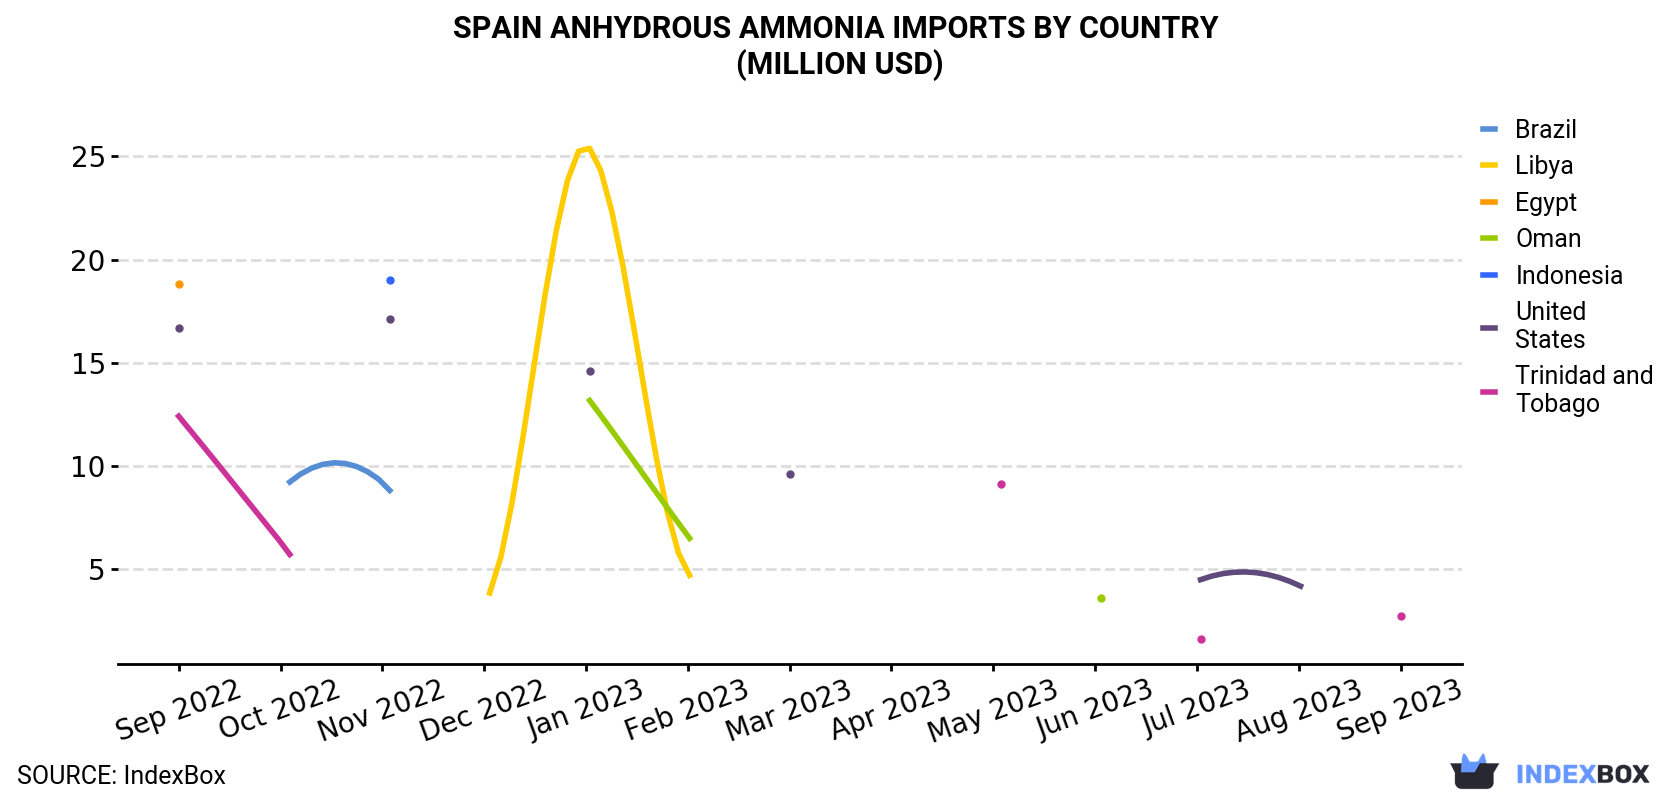 Spain Imports By Country (Million USD)